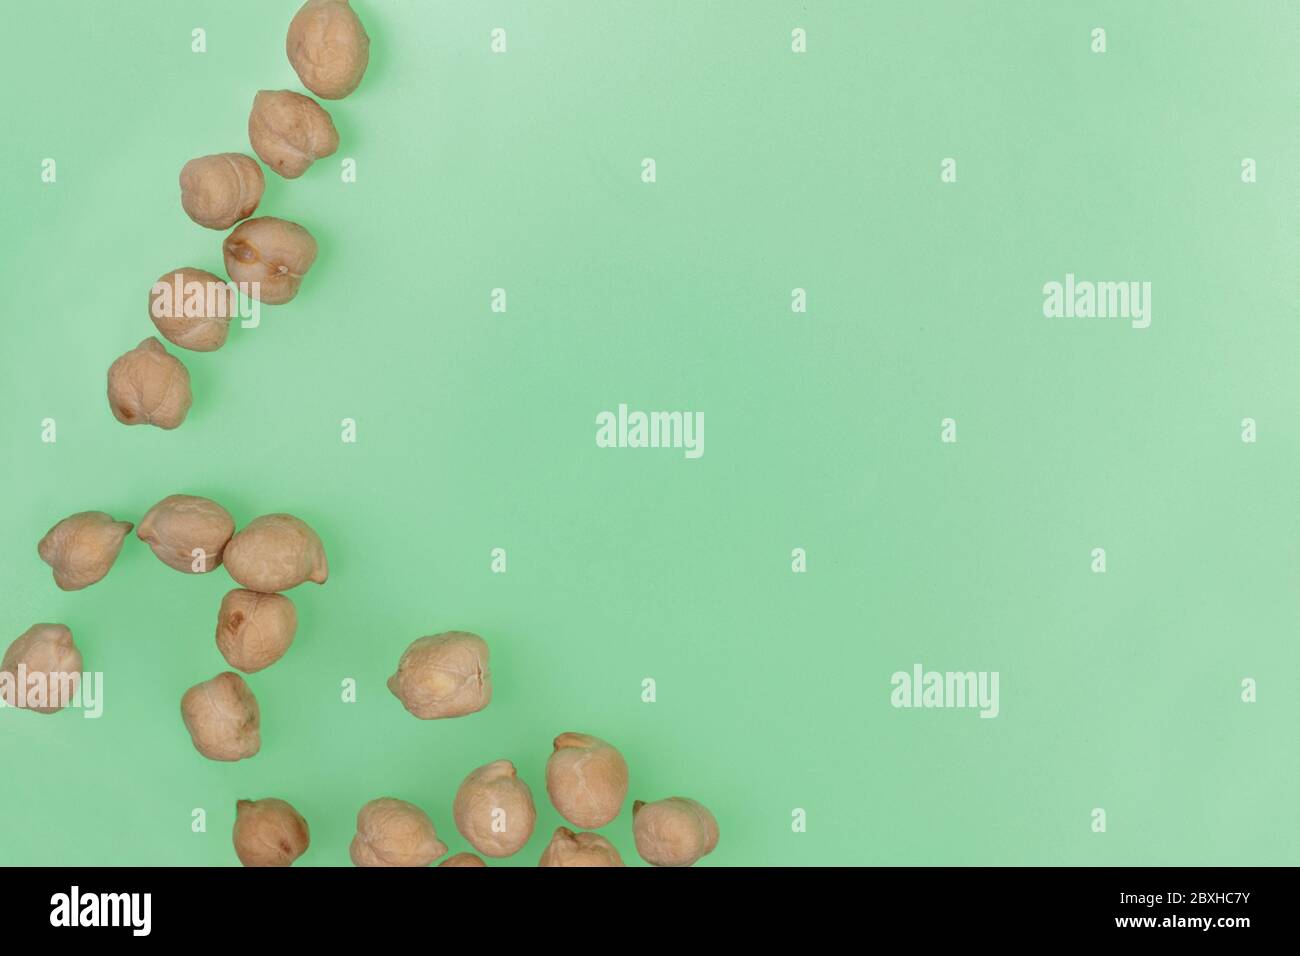 scattered, dry garbanzo beans or chick peas on a green background with copy space Stock Photo